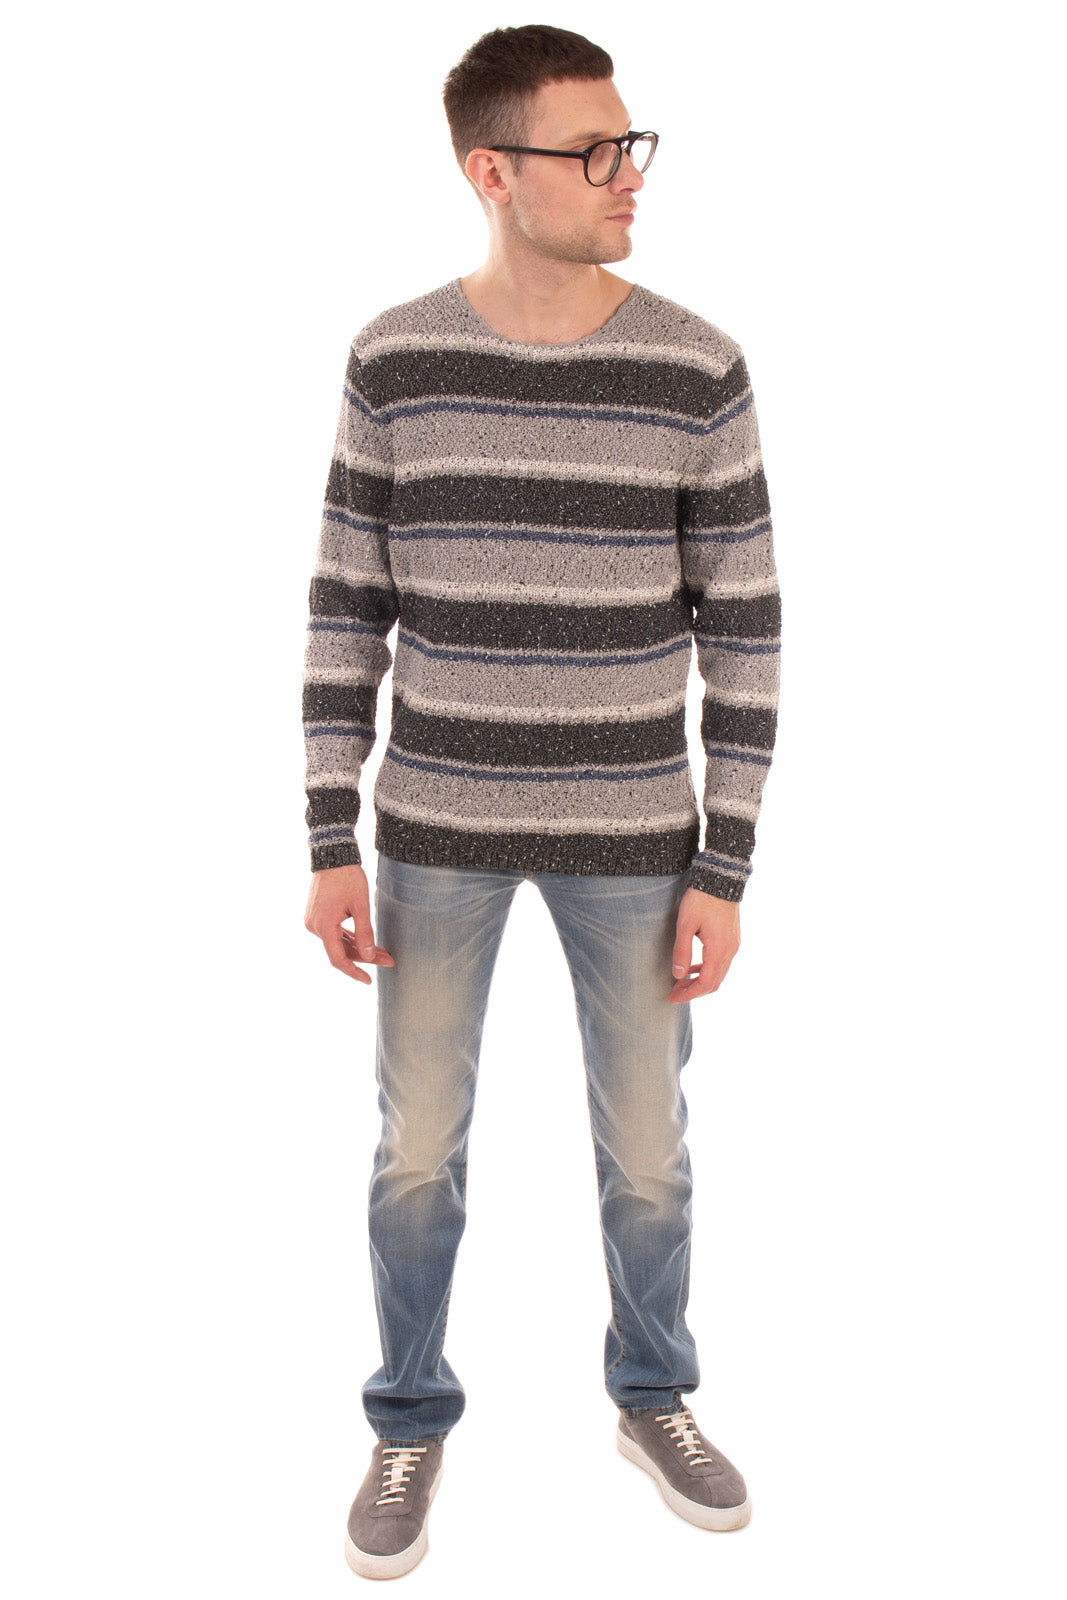 ONLY & SONS Jumper Size L Thin Knit Striped Pattern Long Sleeve- Round Neck gallery main photo